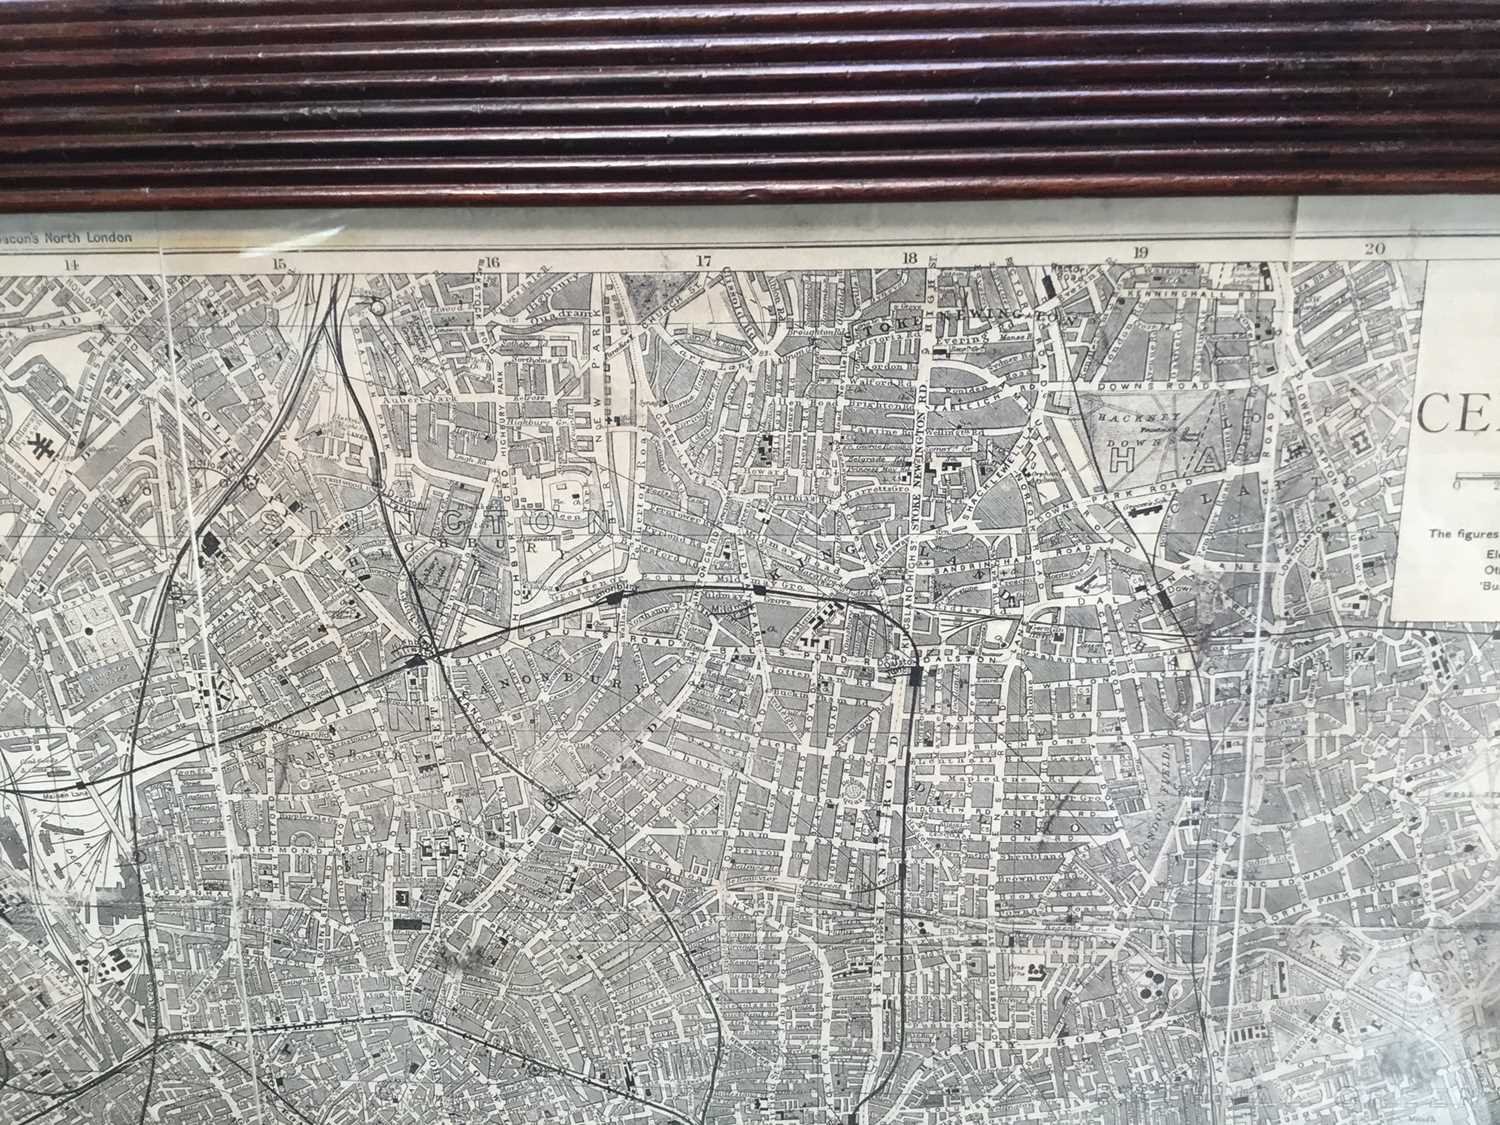 Bacons Map of Central London, pub. London, stuck down on paper, image 97cm x 73cm in glazed frame - Image 4 of 11